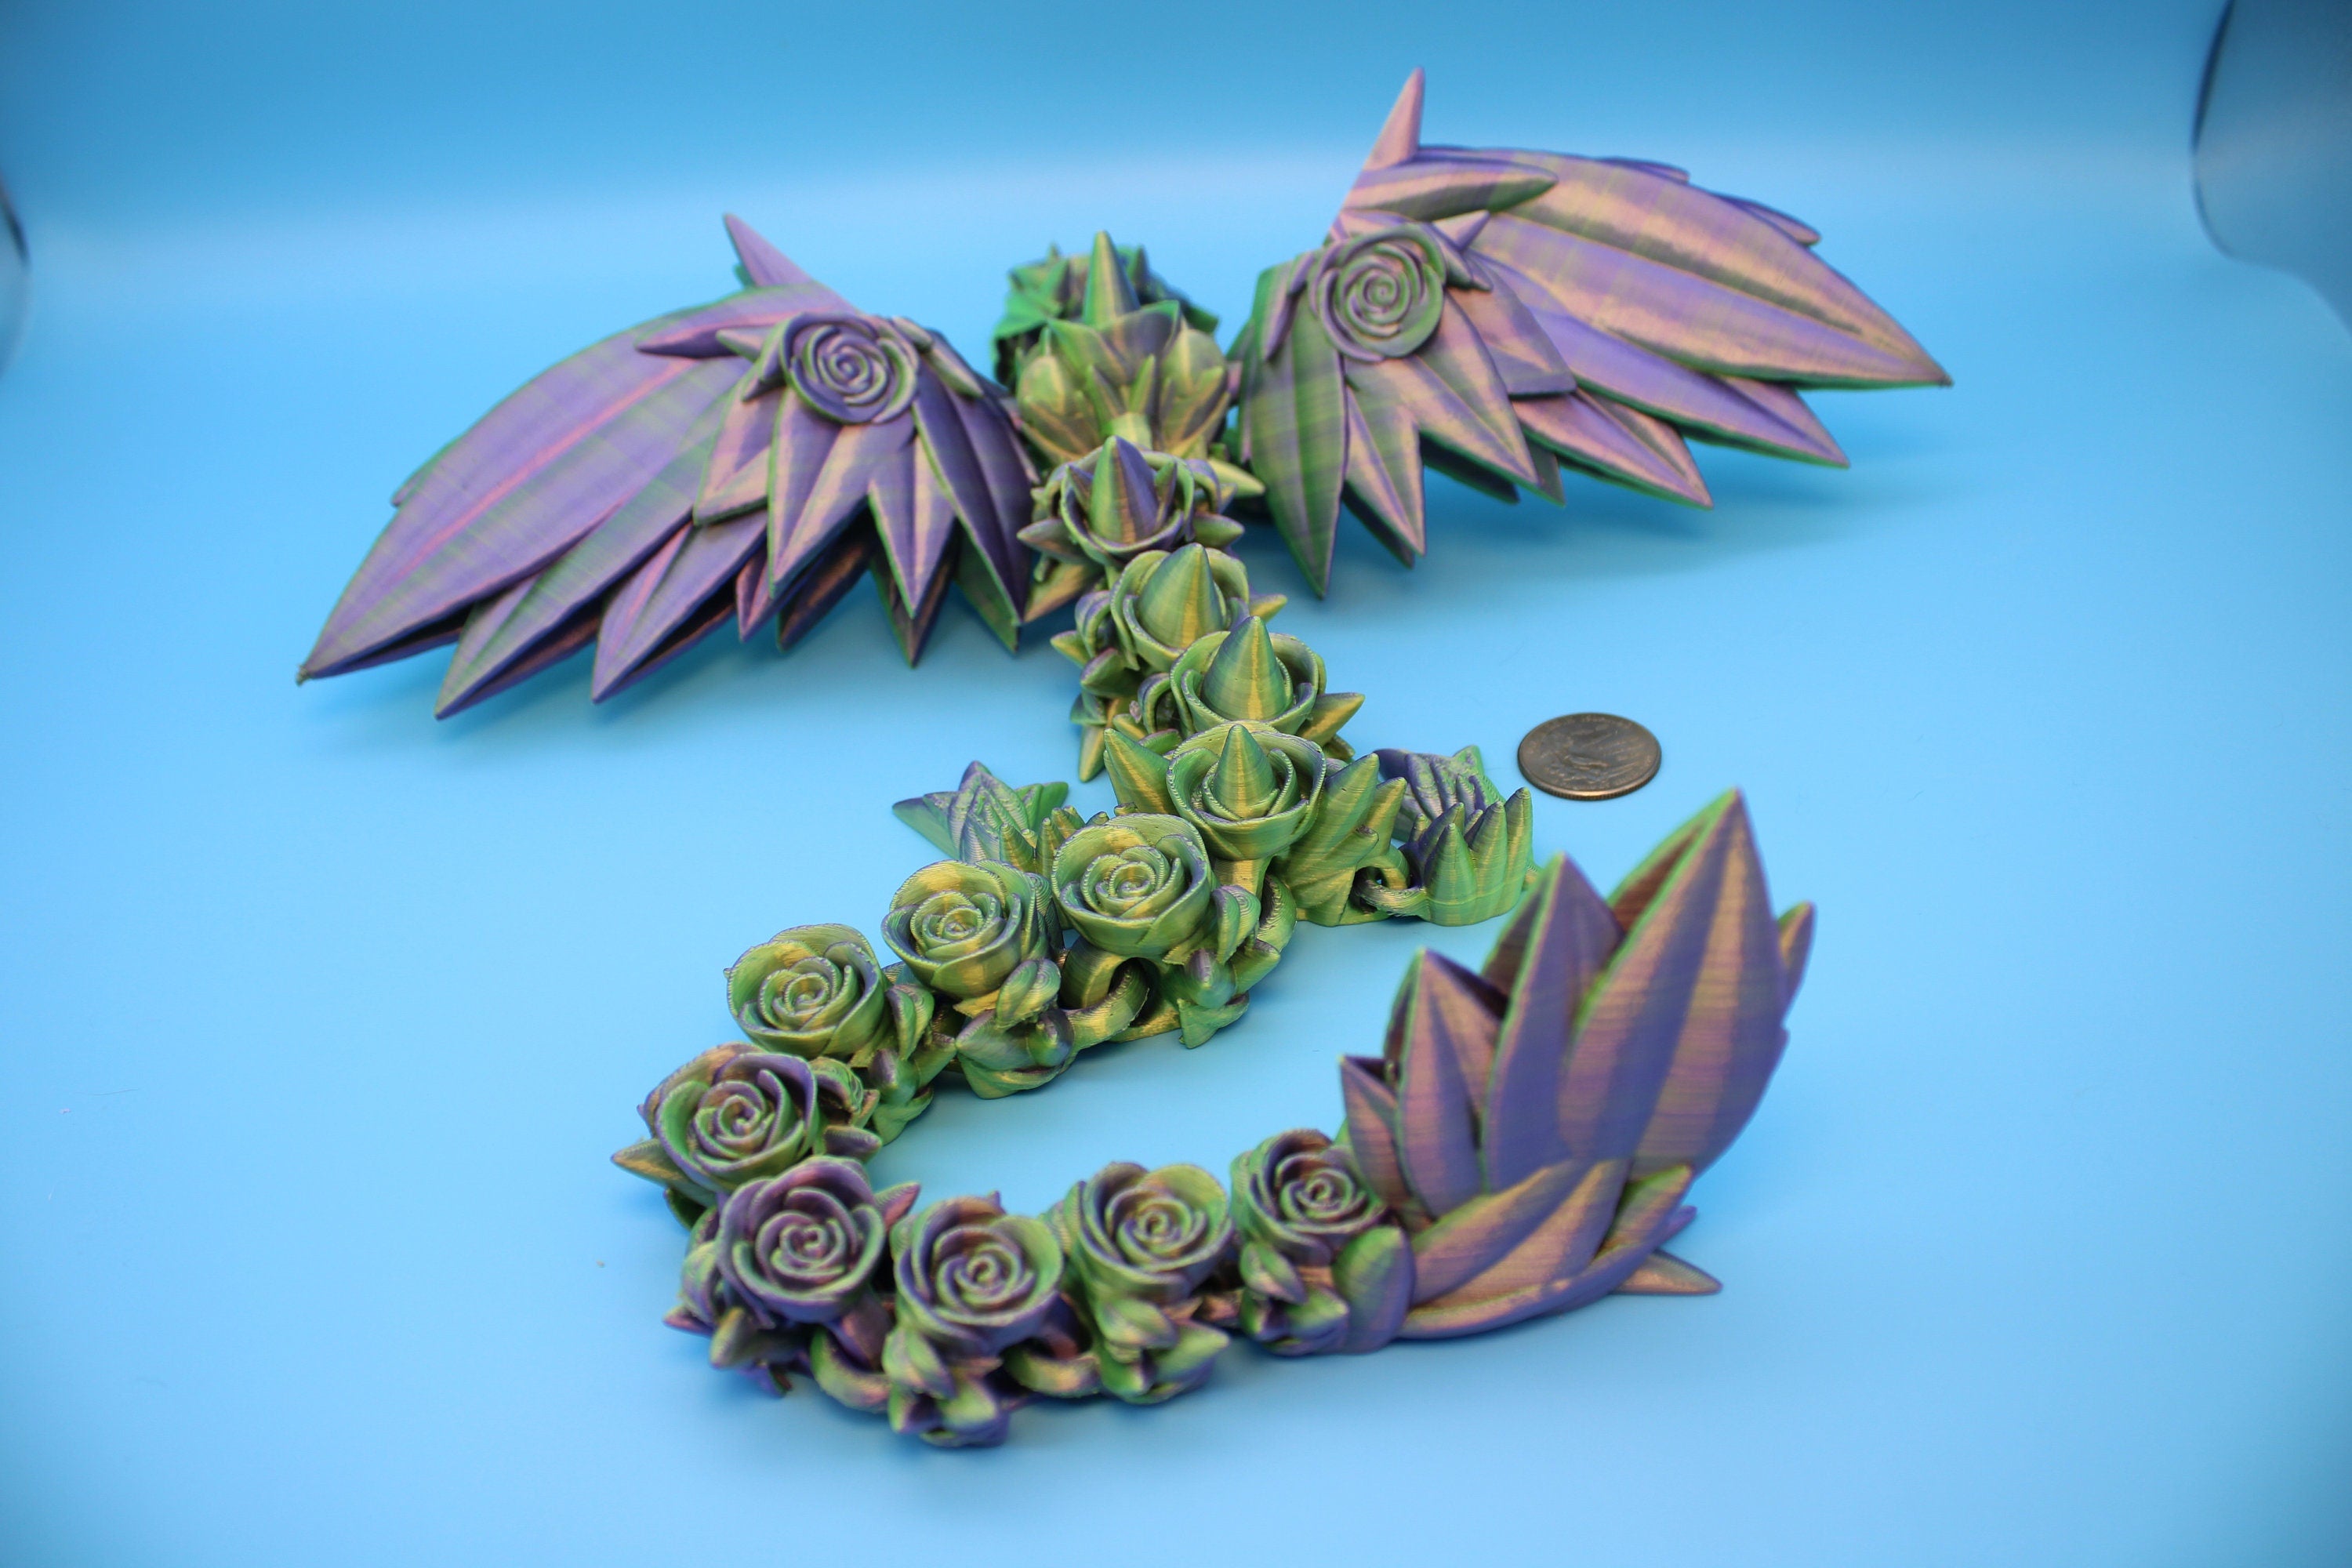 Flawed "Two tone" Rose Wing Articulating Dragon | 3D Printed Fidget | Flexi Toy | Adult Fidget Toy | Sensory Desk Toy | 19 in.